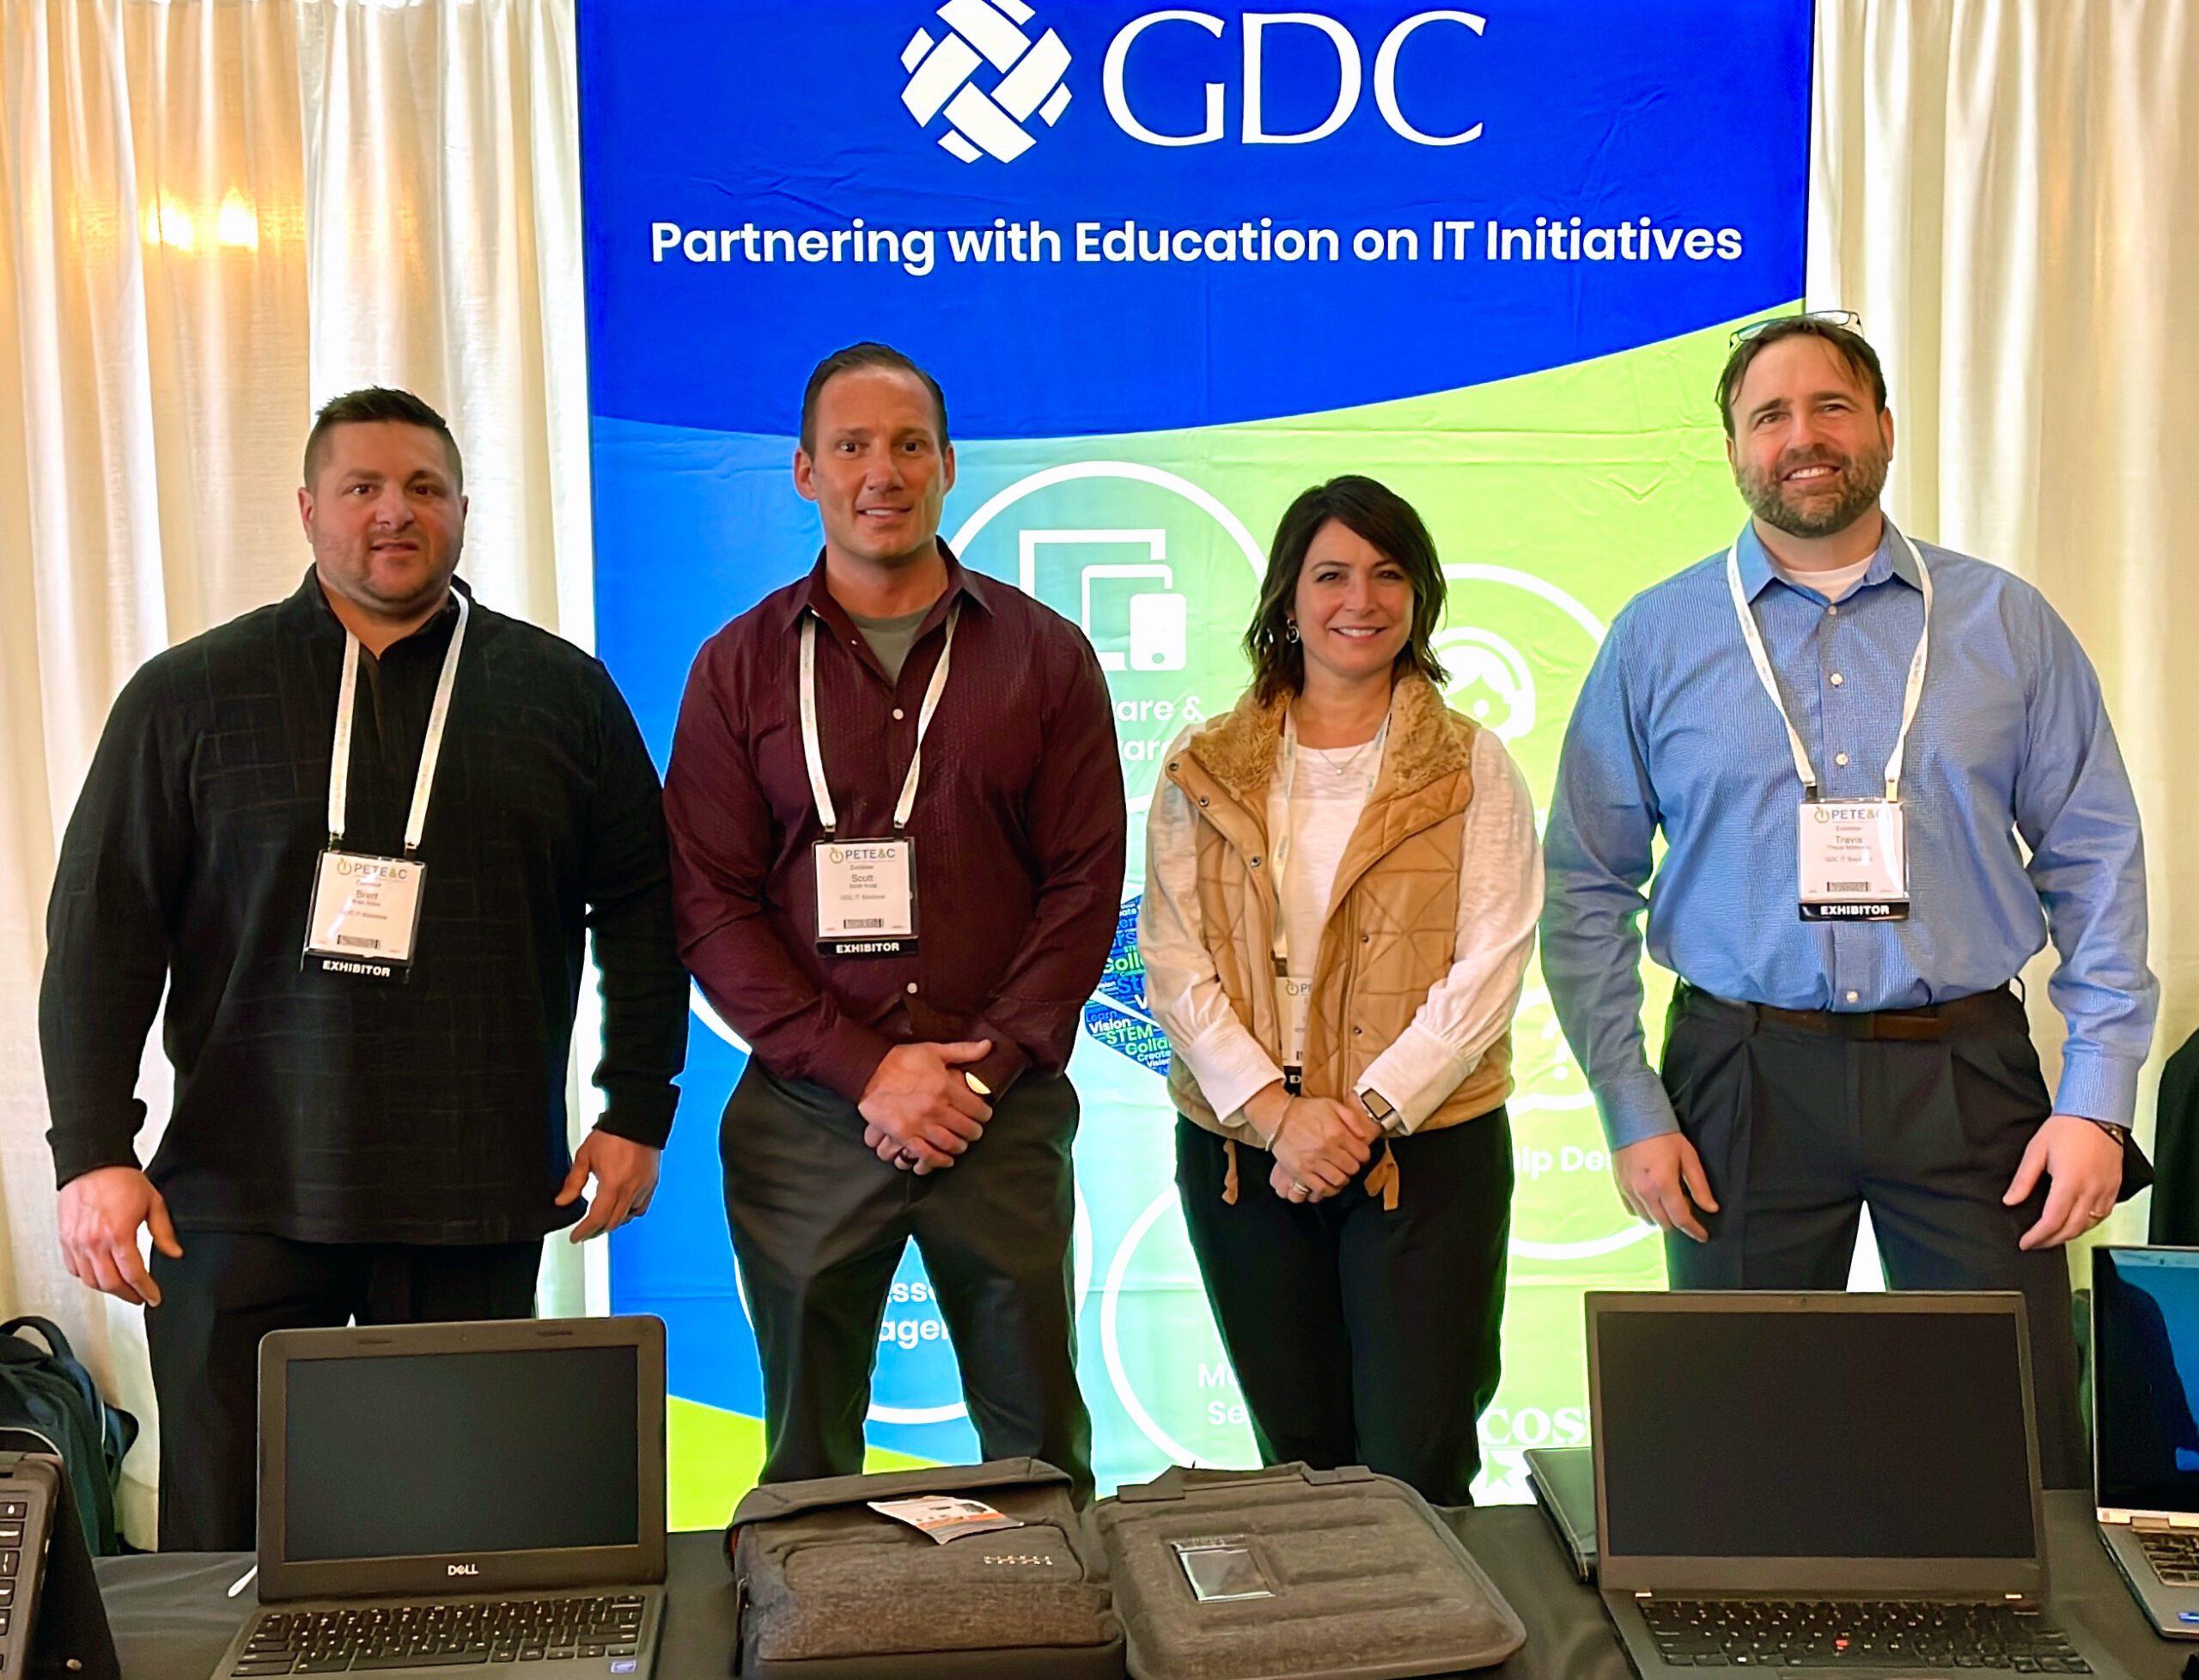 GDC K12 Higher Education Team in GDC Booth at the 2022 Pennsylvania Educational Technology Expo and Conference